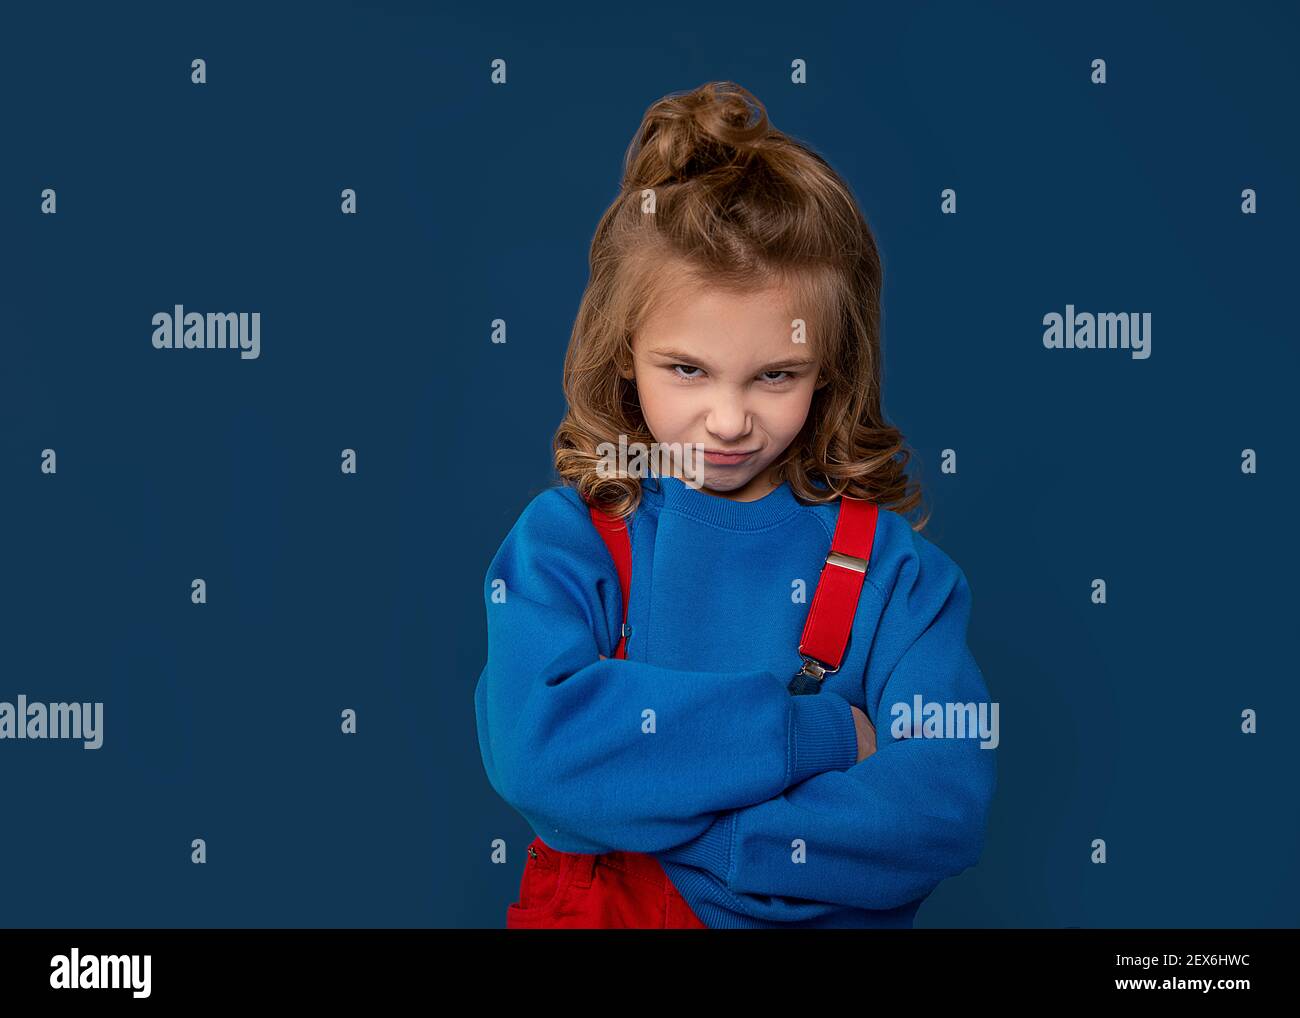 Spoiled child, naughty baby, kids whims. Beautiful little girl showing character. Child crisis psychology concept. Close-up portrait Stock Photo